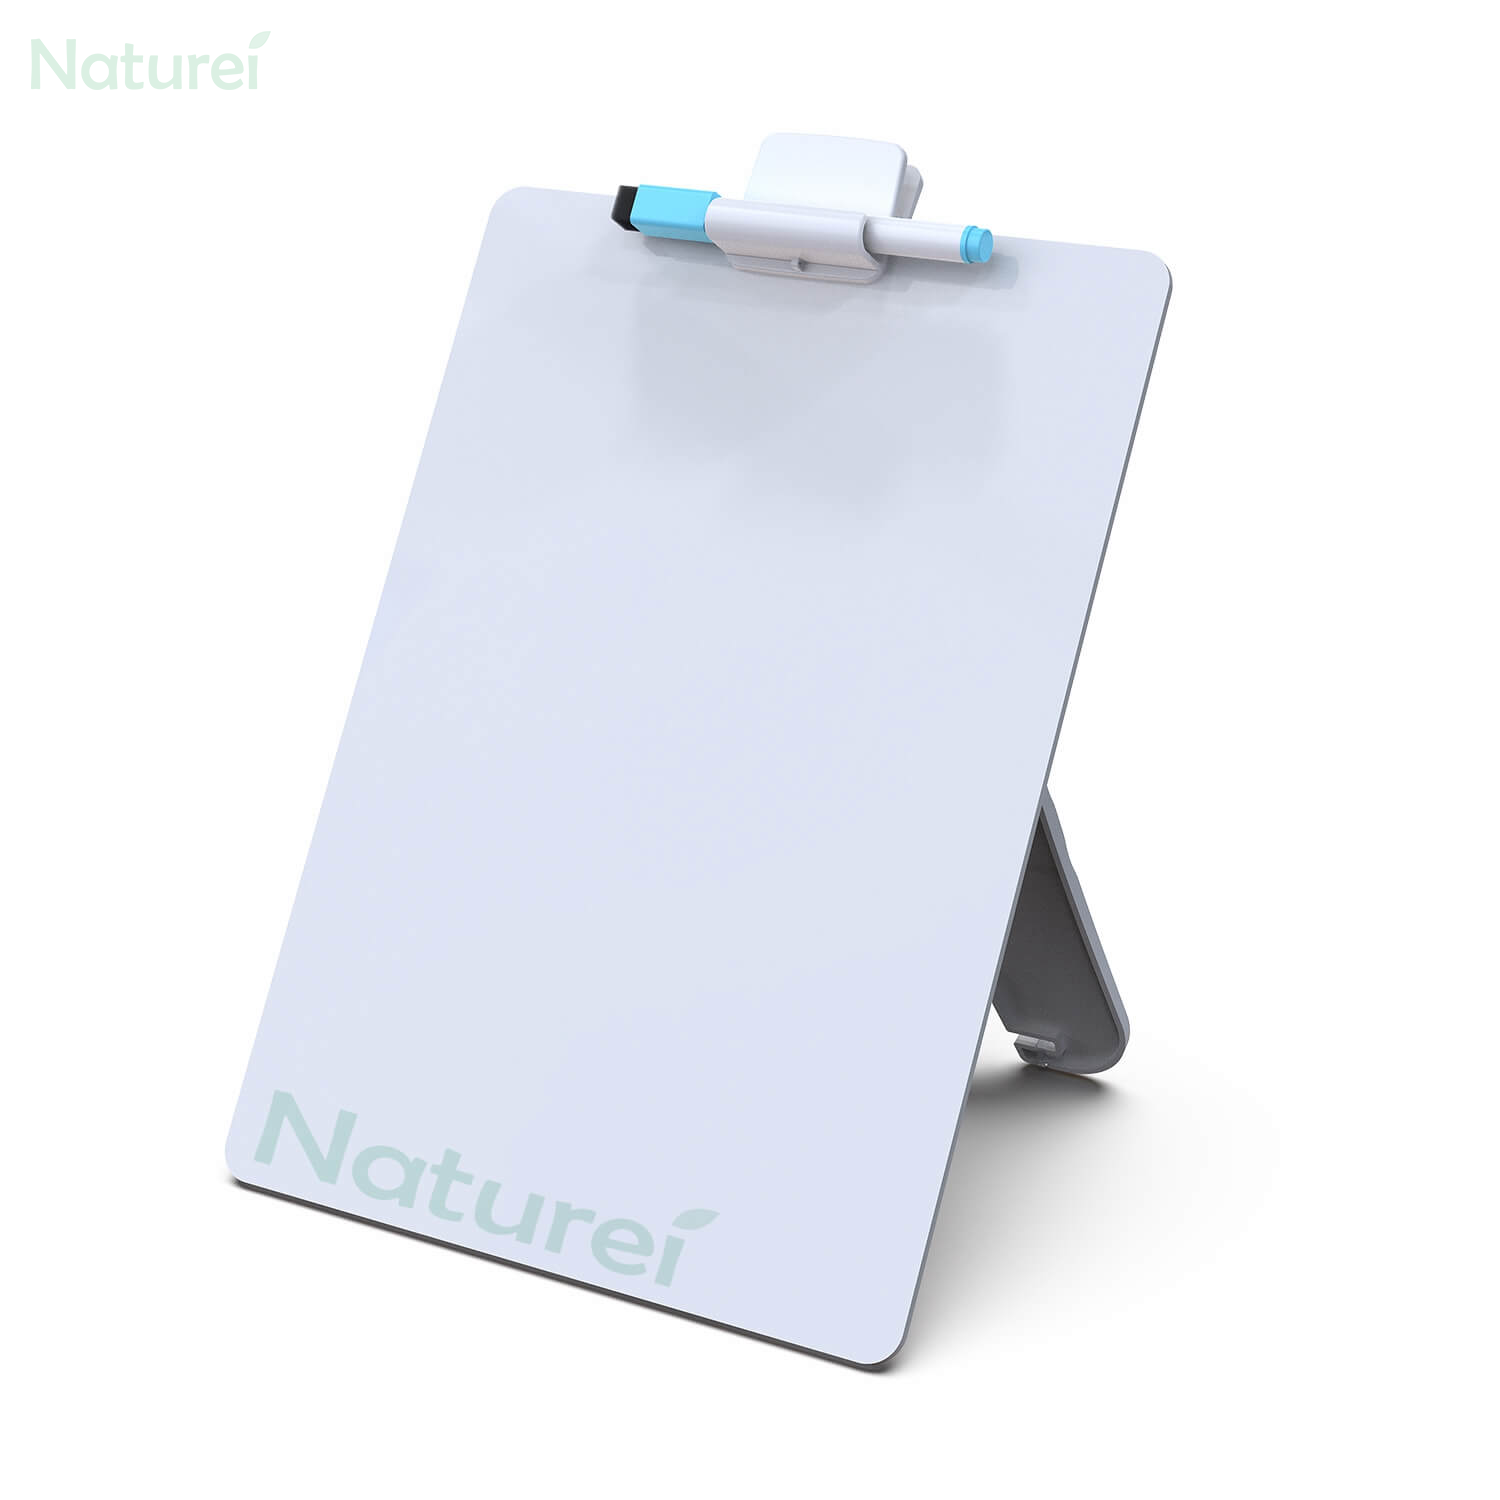 Desktop Whiteboard Easel with Stand